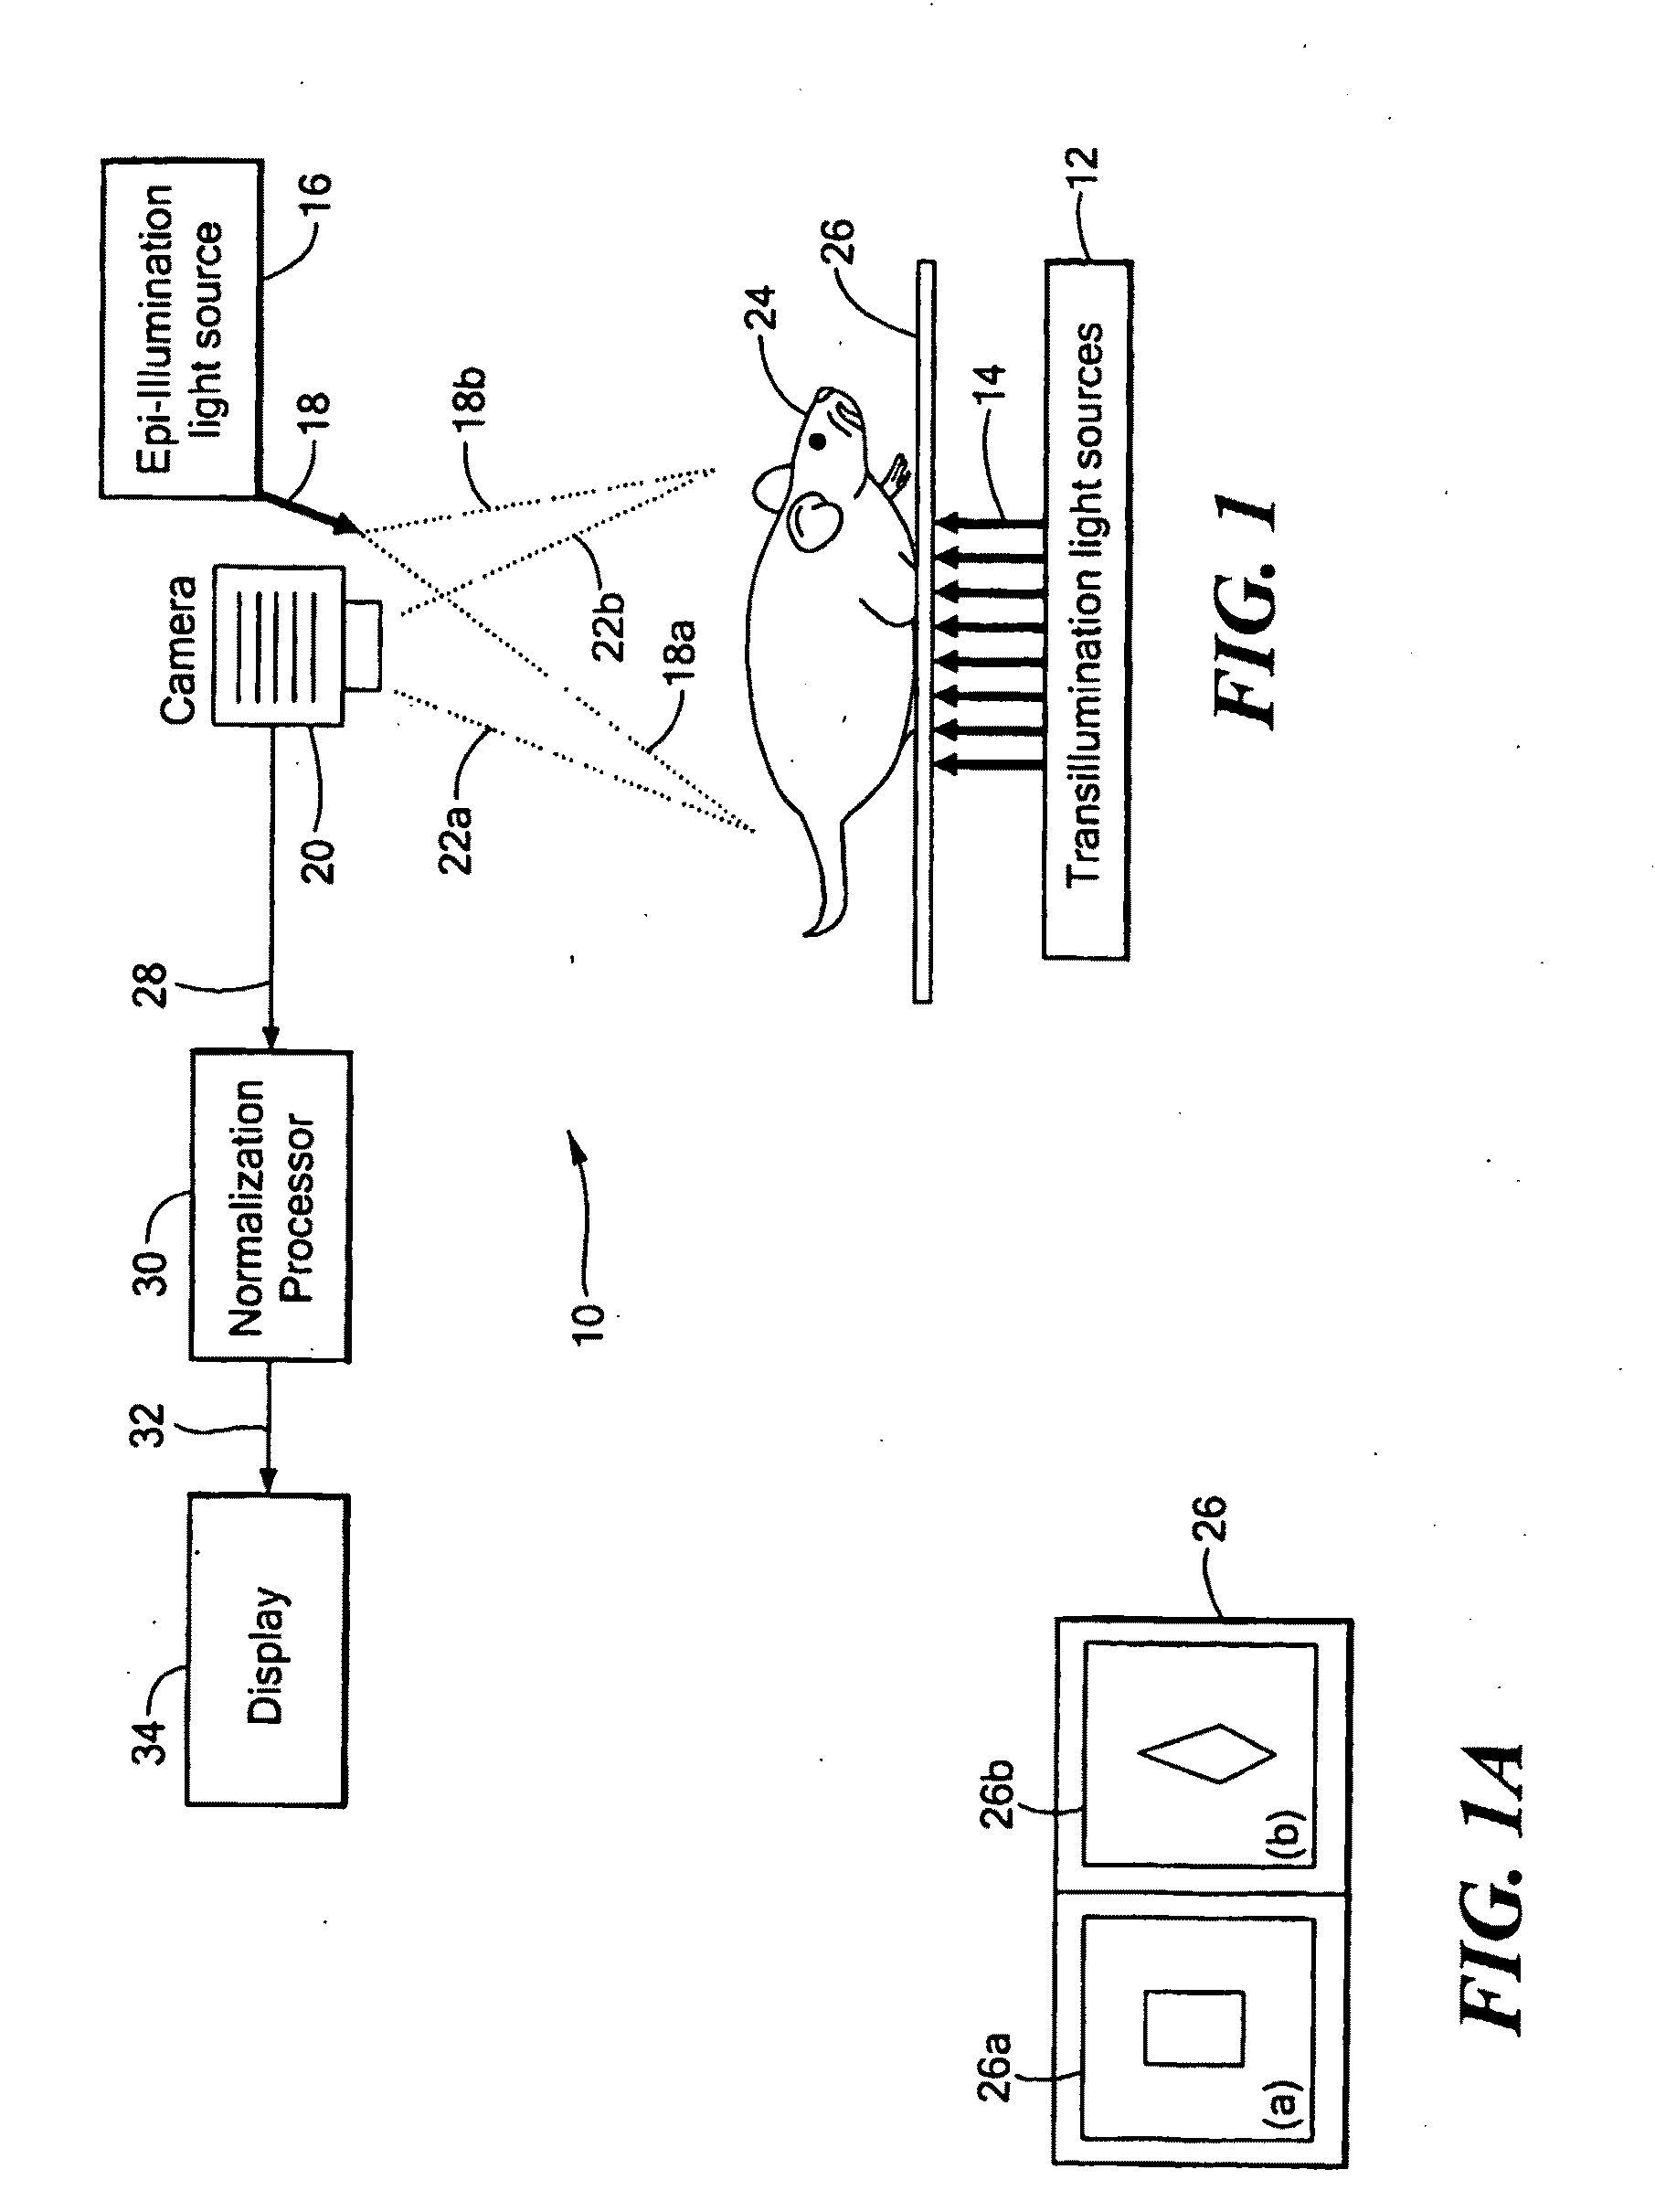 System and Method for Normalized Flourescence or Bioluminescence Imaging